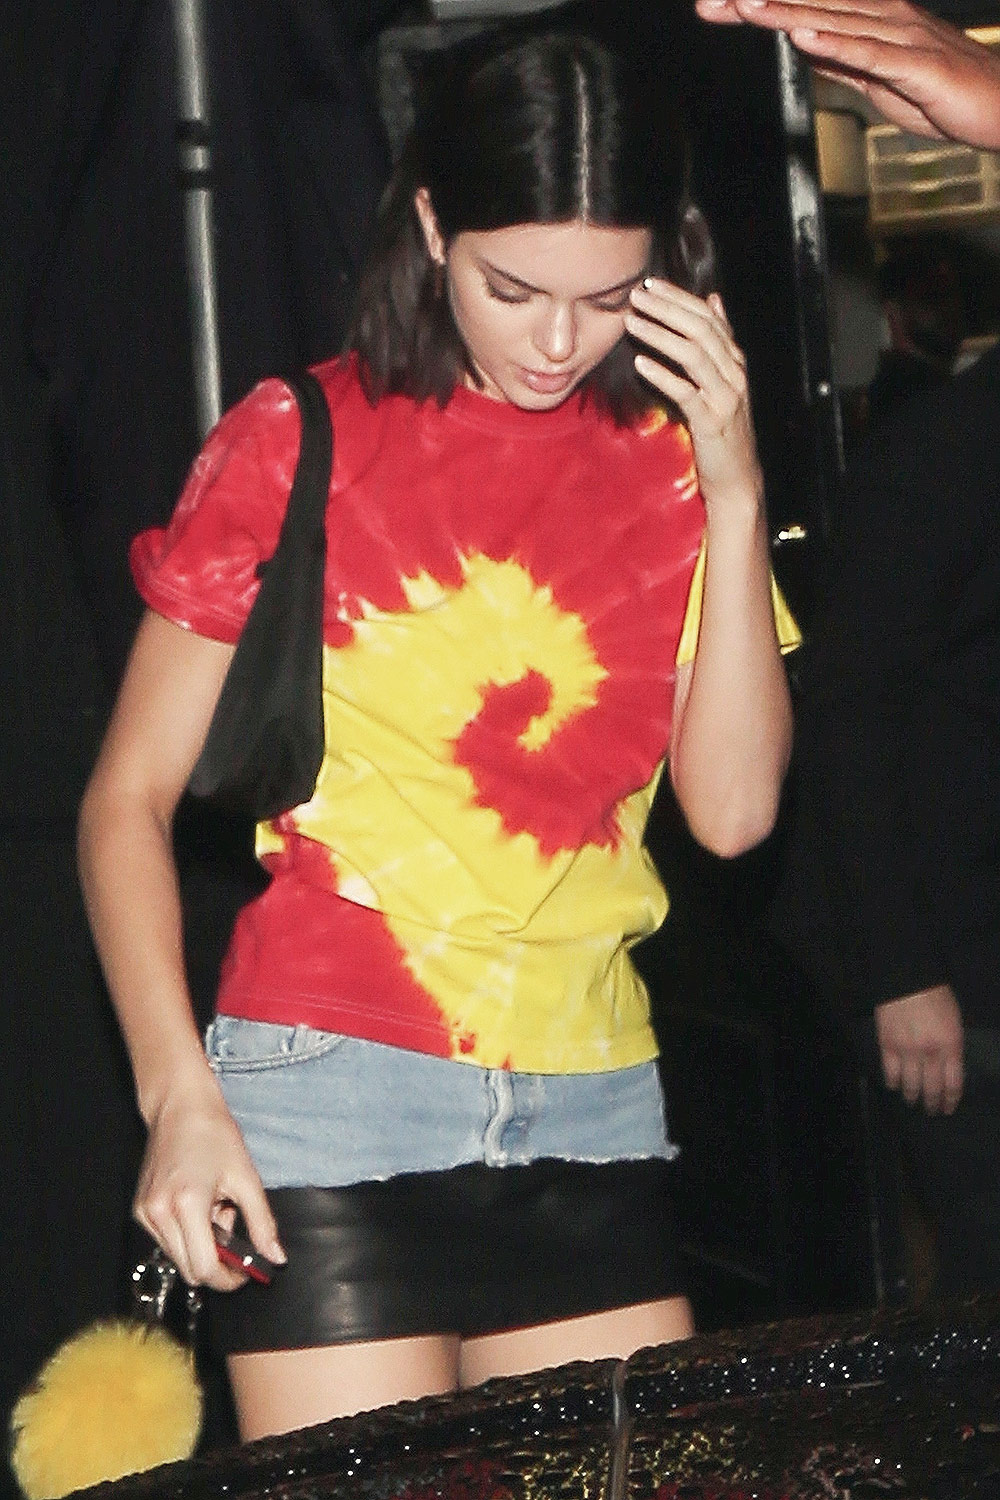 Kendall Jenner jumps into her ride after a night out